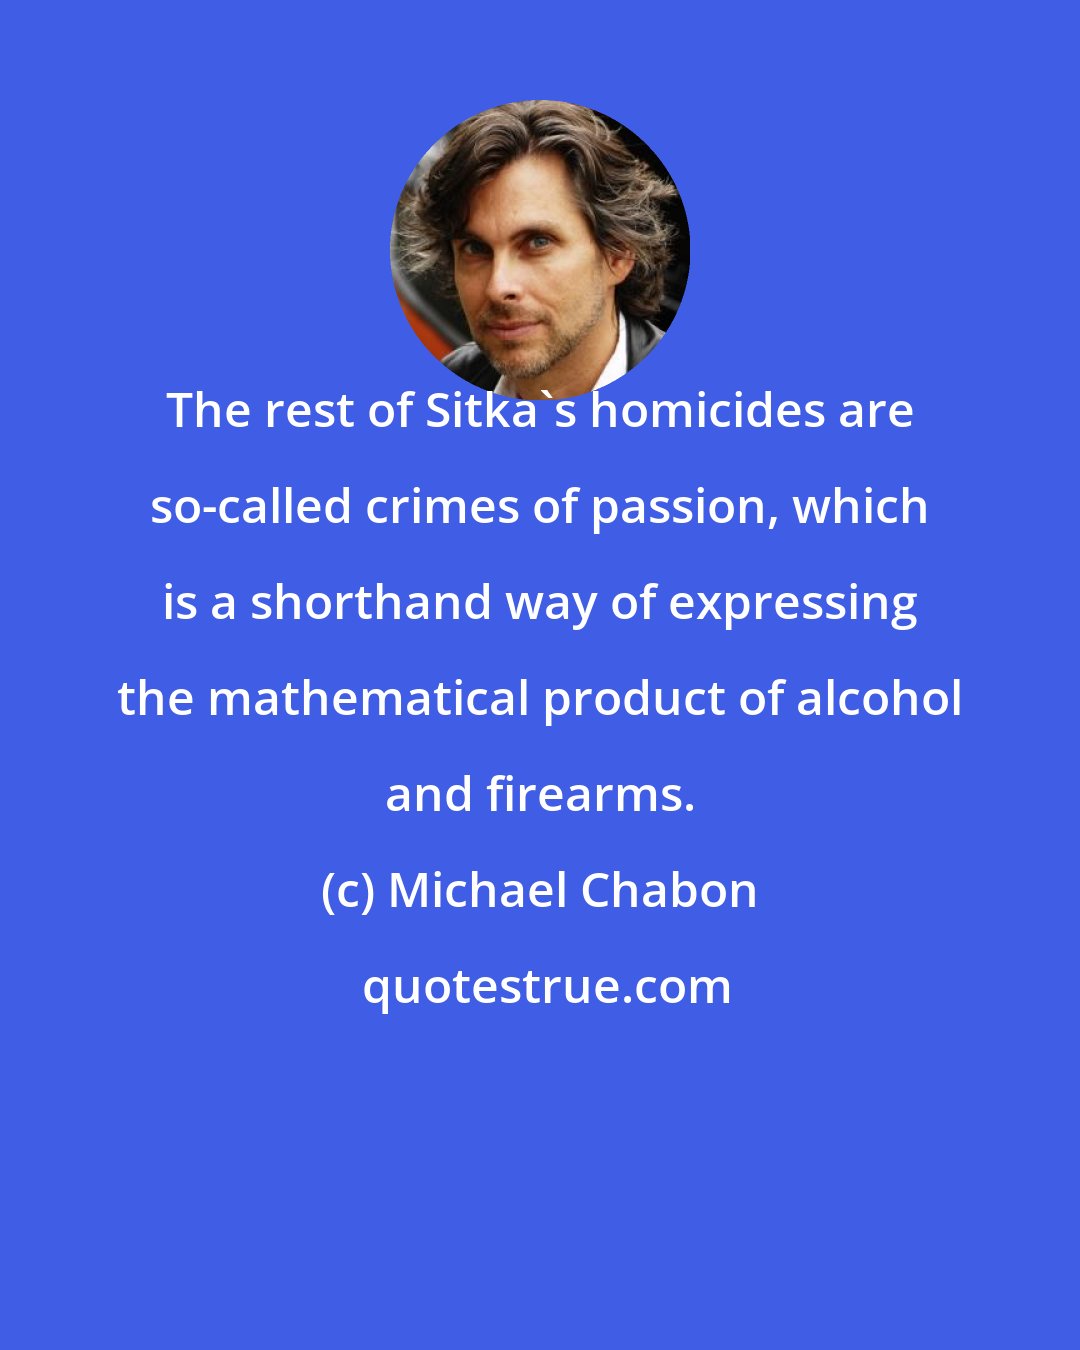 Michael Chabon: The rest of Sitka's homicides are so-called crimes of passion, which is a shorthand way of expressing the mathematical product of alcohol and firearms.